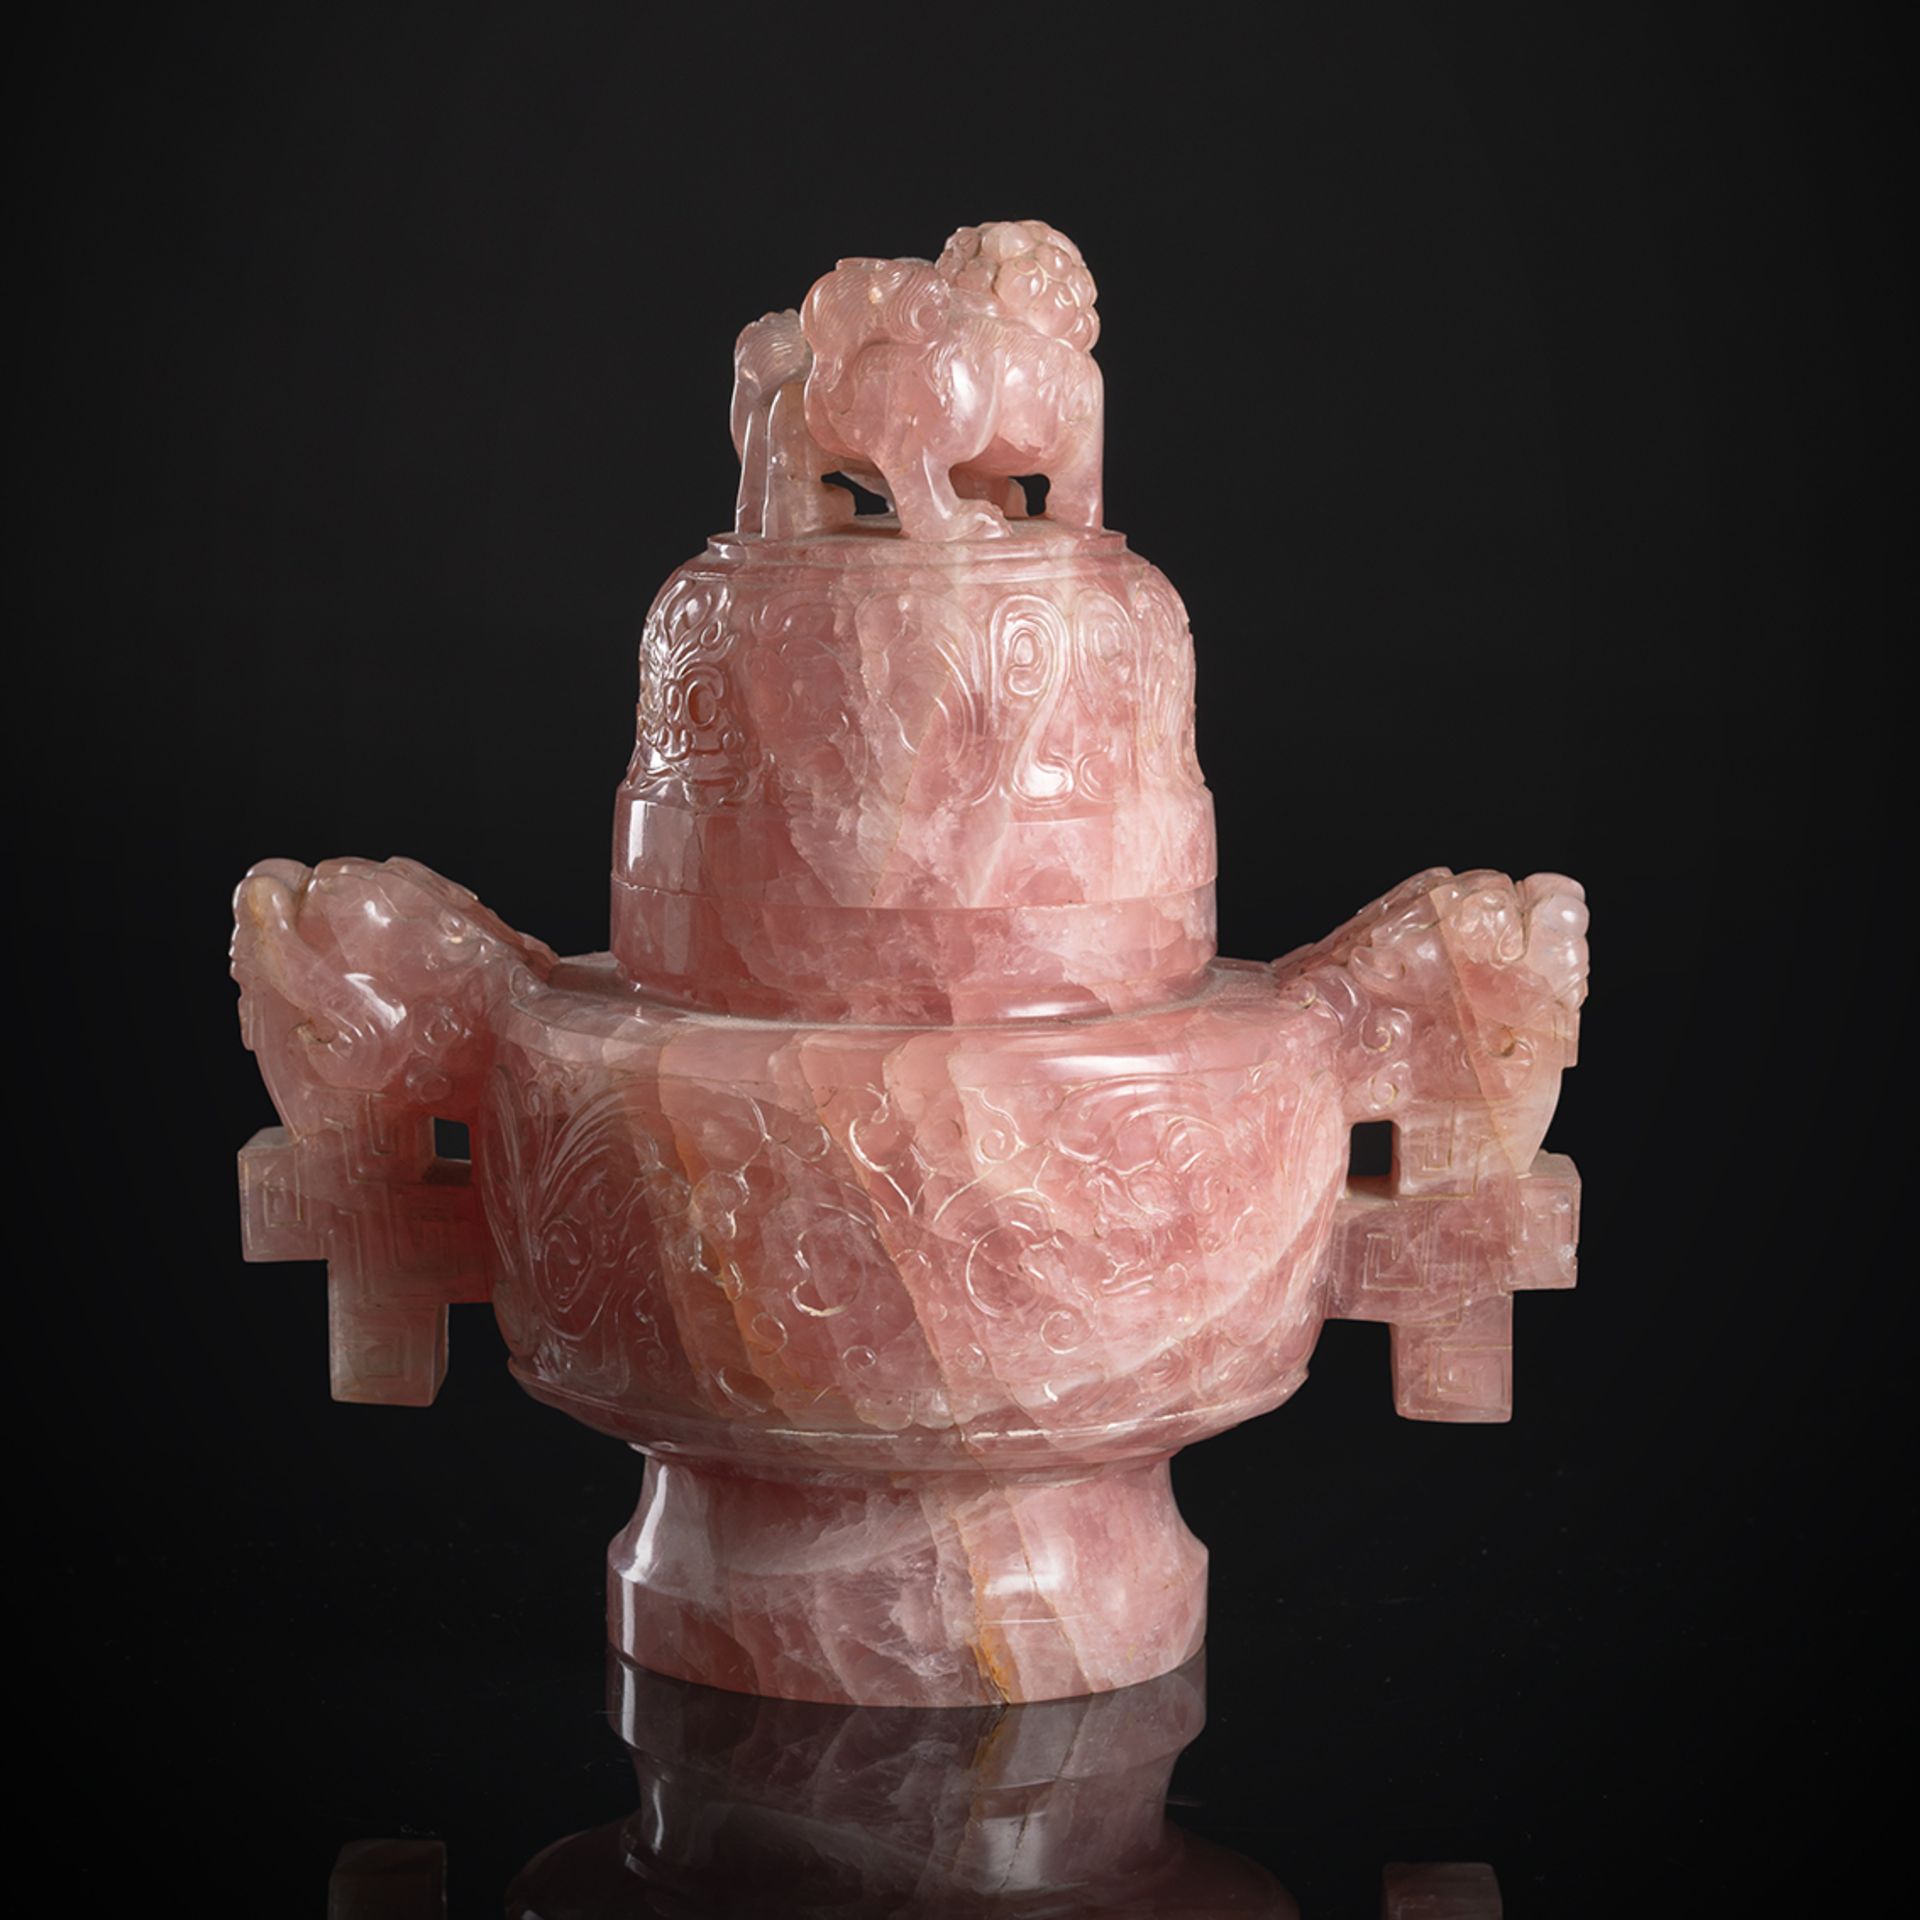 A WELL CARVED ROSE QUARTZ CENSER AND COVER ON WOOD STAND